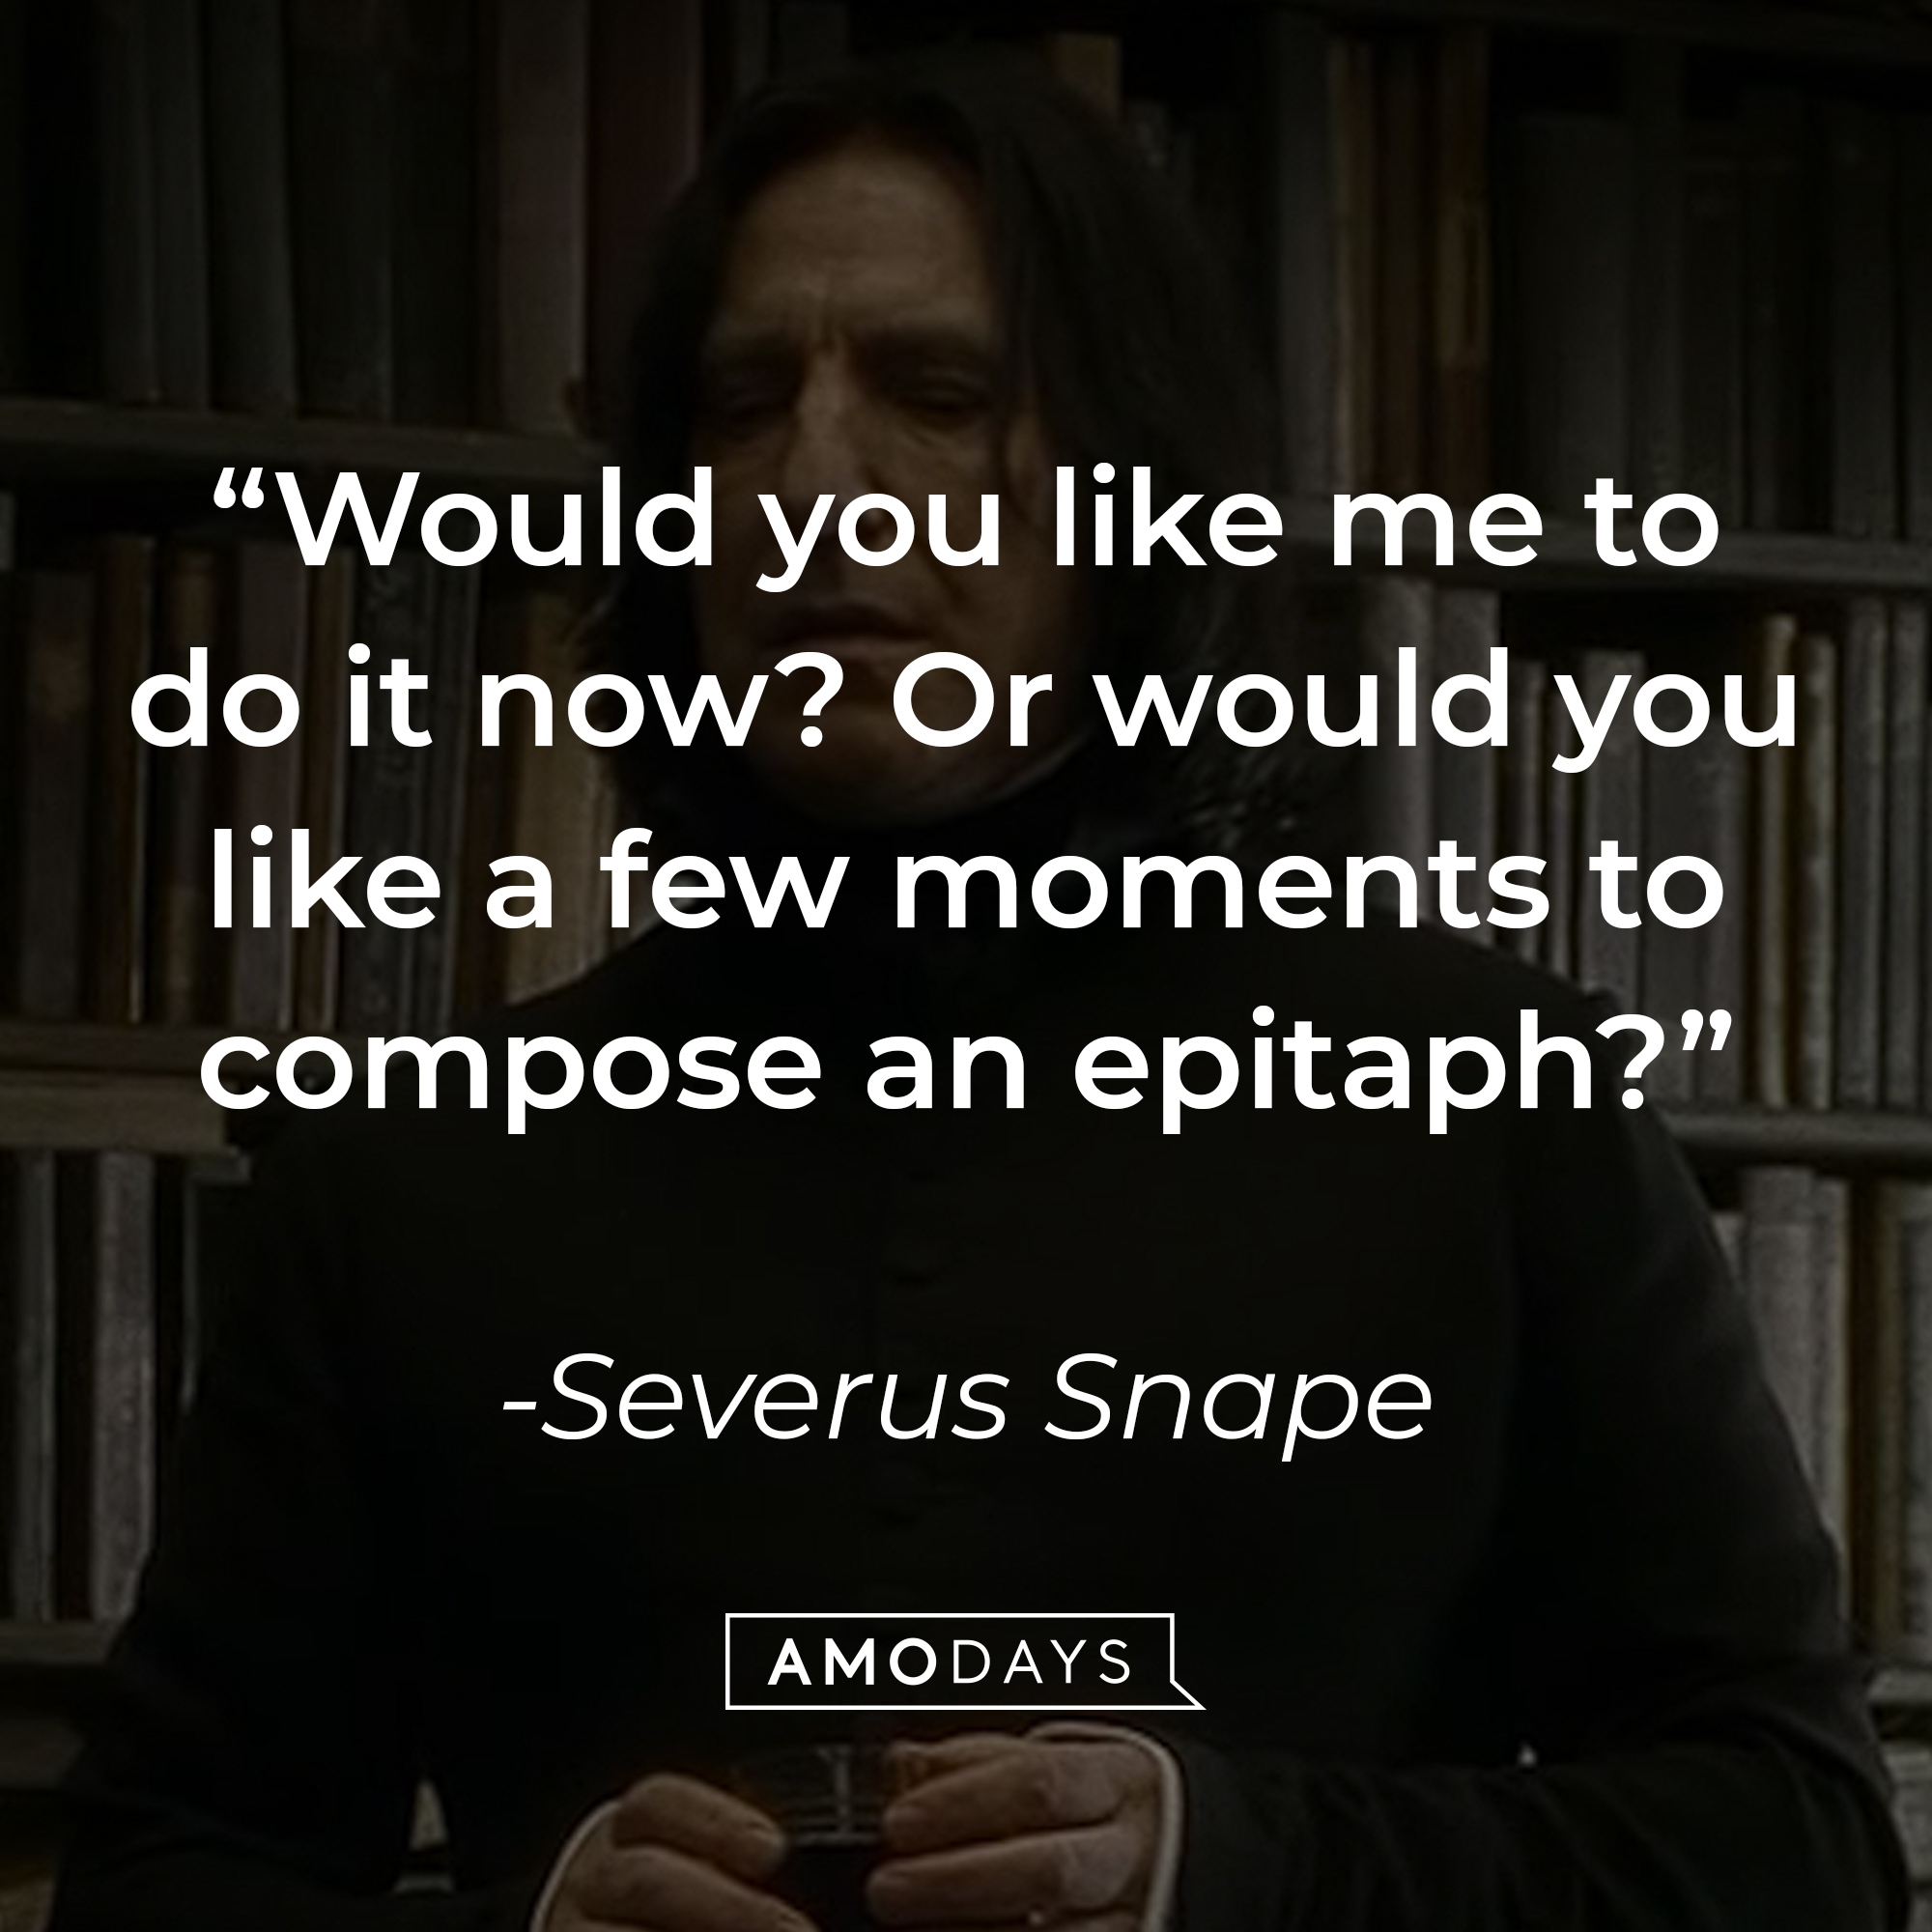 Severus Snape's quote: "Would you like me to do it now? Or would you like a few moments to compose an epitaph?" | Source: YouTube/harrypotter